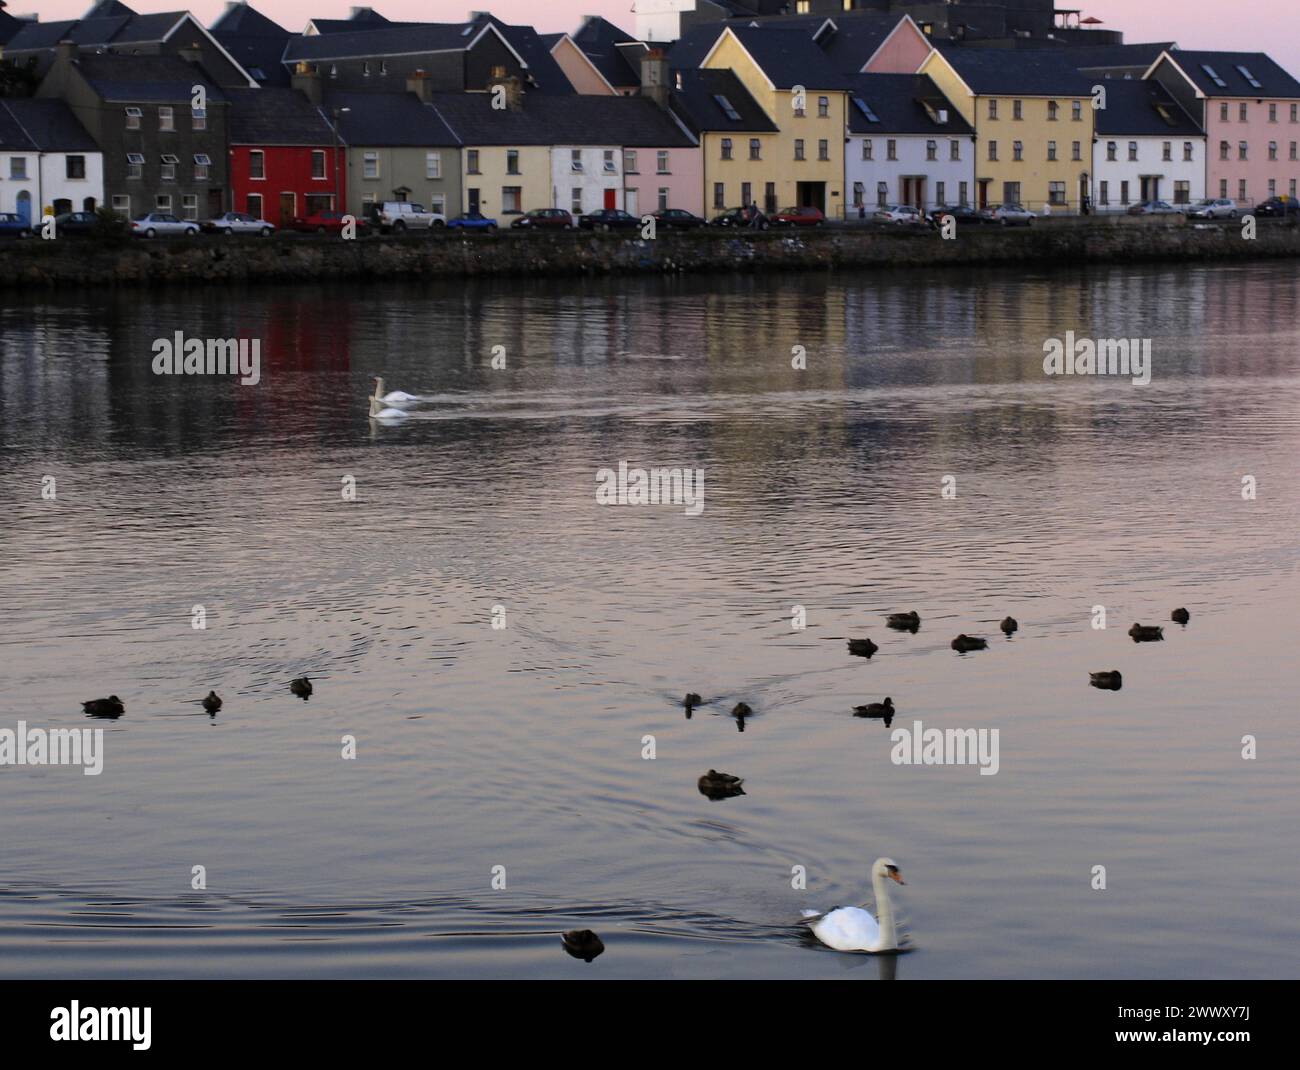 Swans and ducks on a calm body of water in front of colourful house facades at dusk Ireland Galway Stock Photo